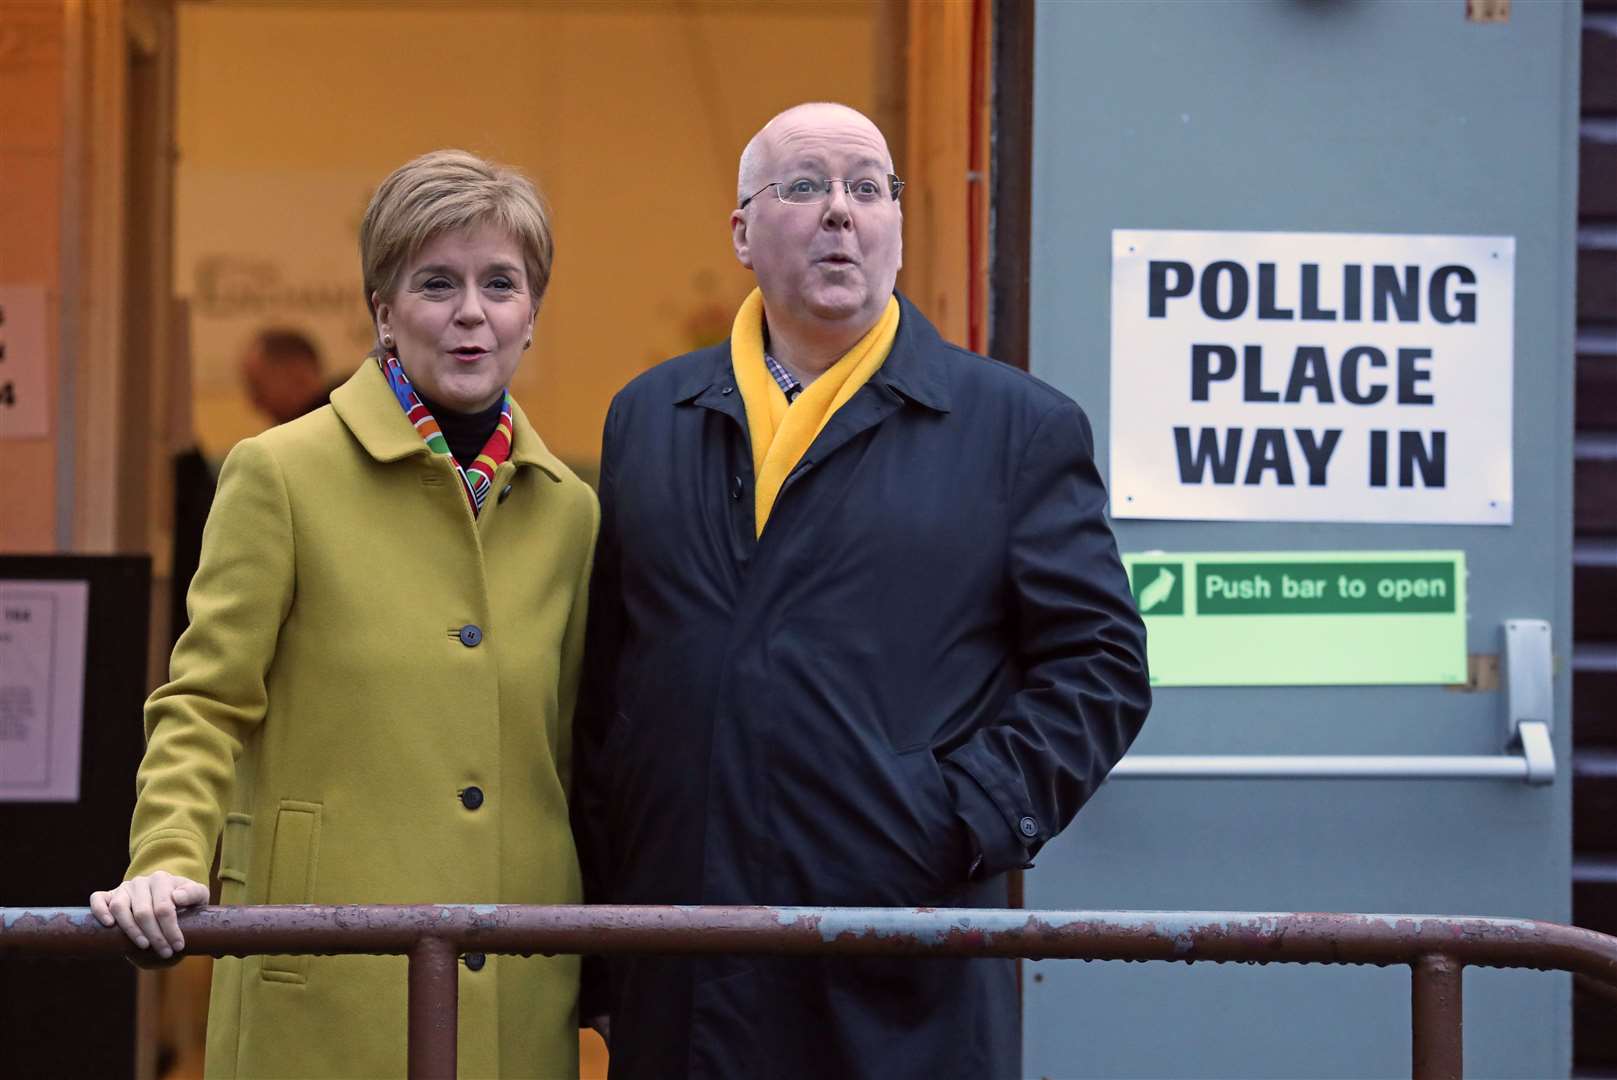 Scottish Tories called for former SNP leader Nicola Sturgeon to be suspended from the party, along with her husband, former chief executive Peter Murrell (Andrew Milligan/PA)